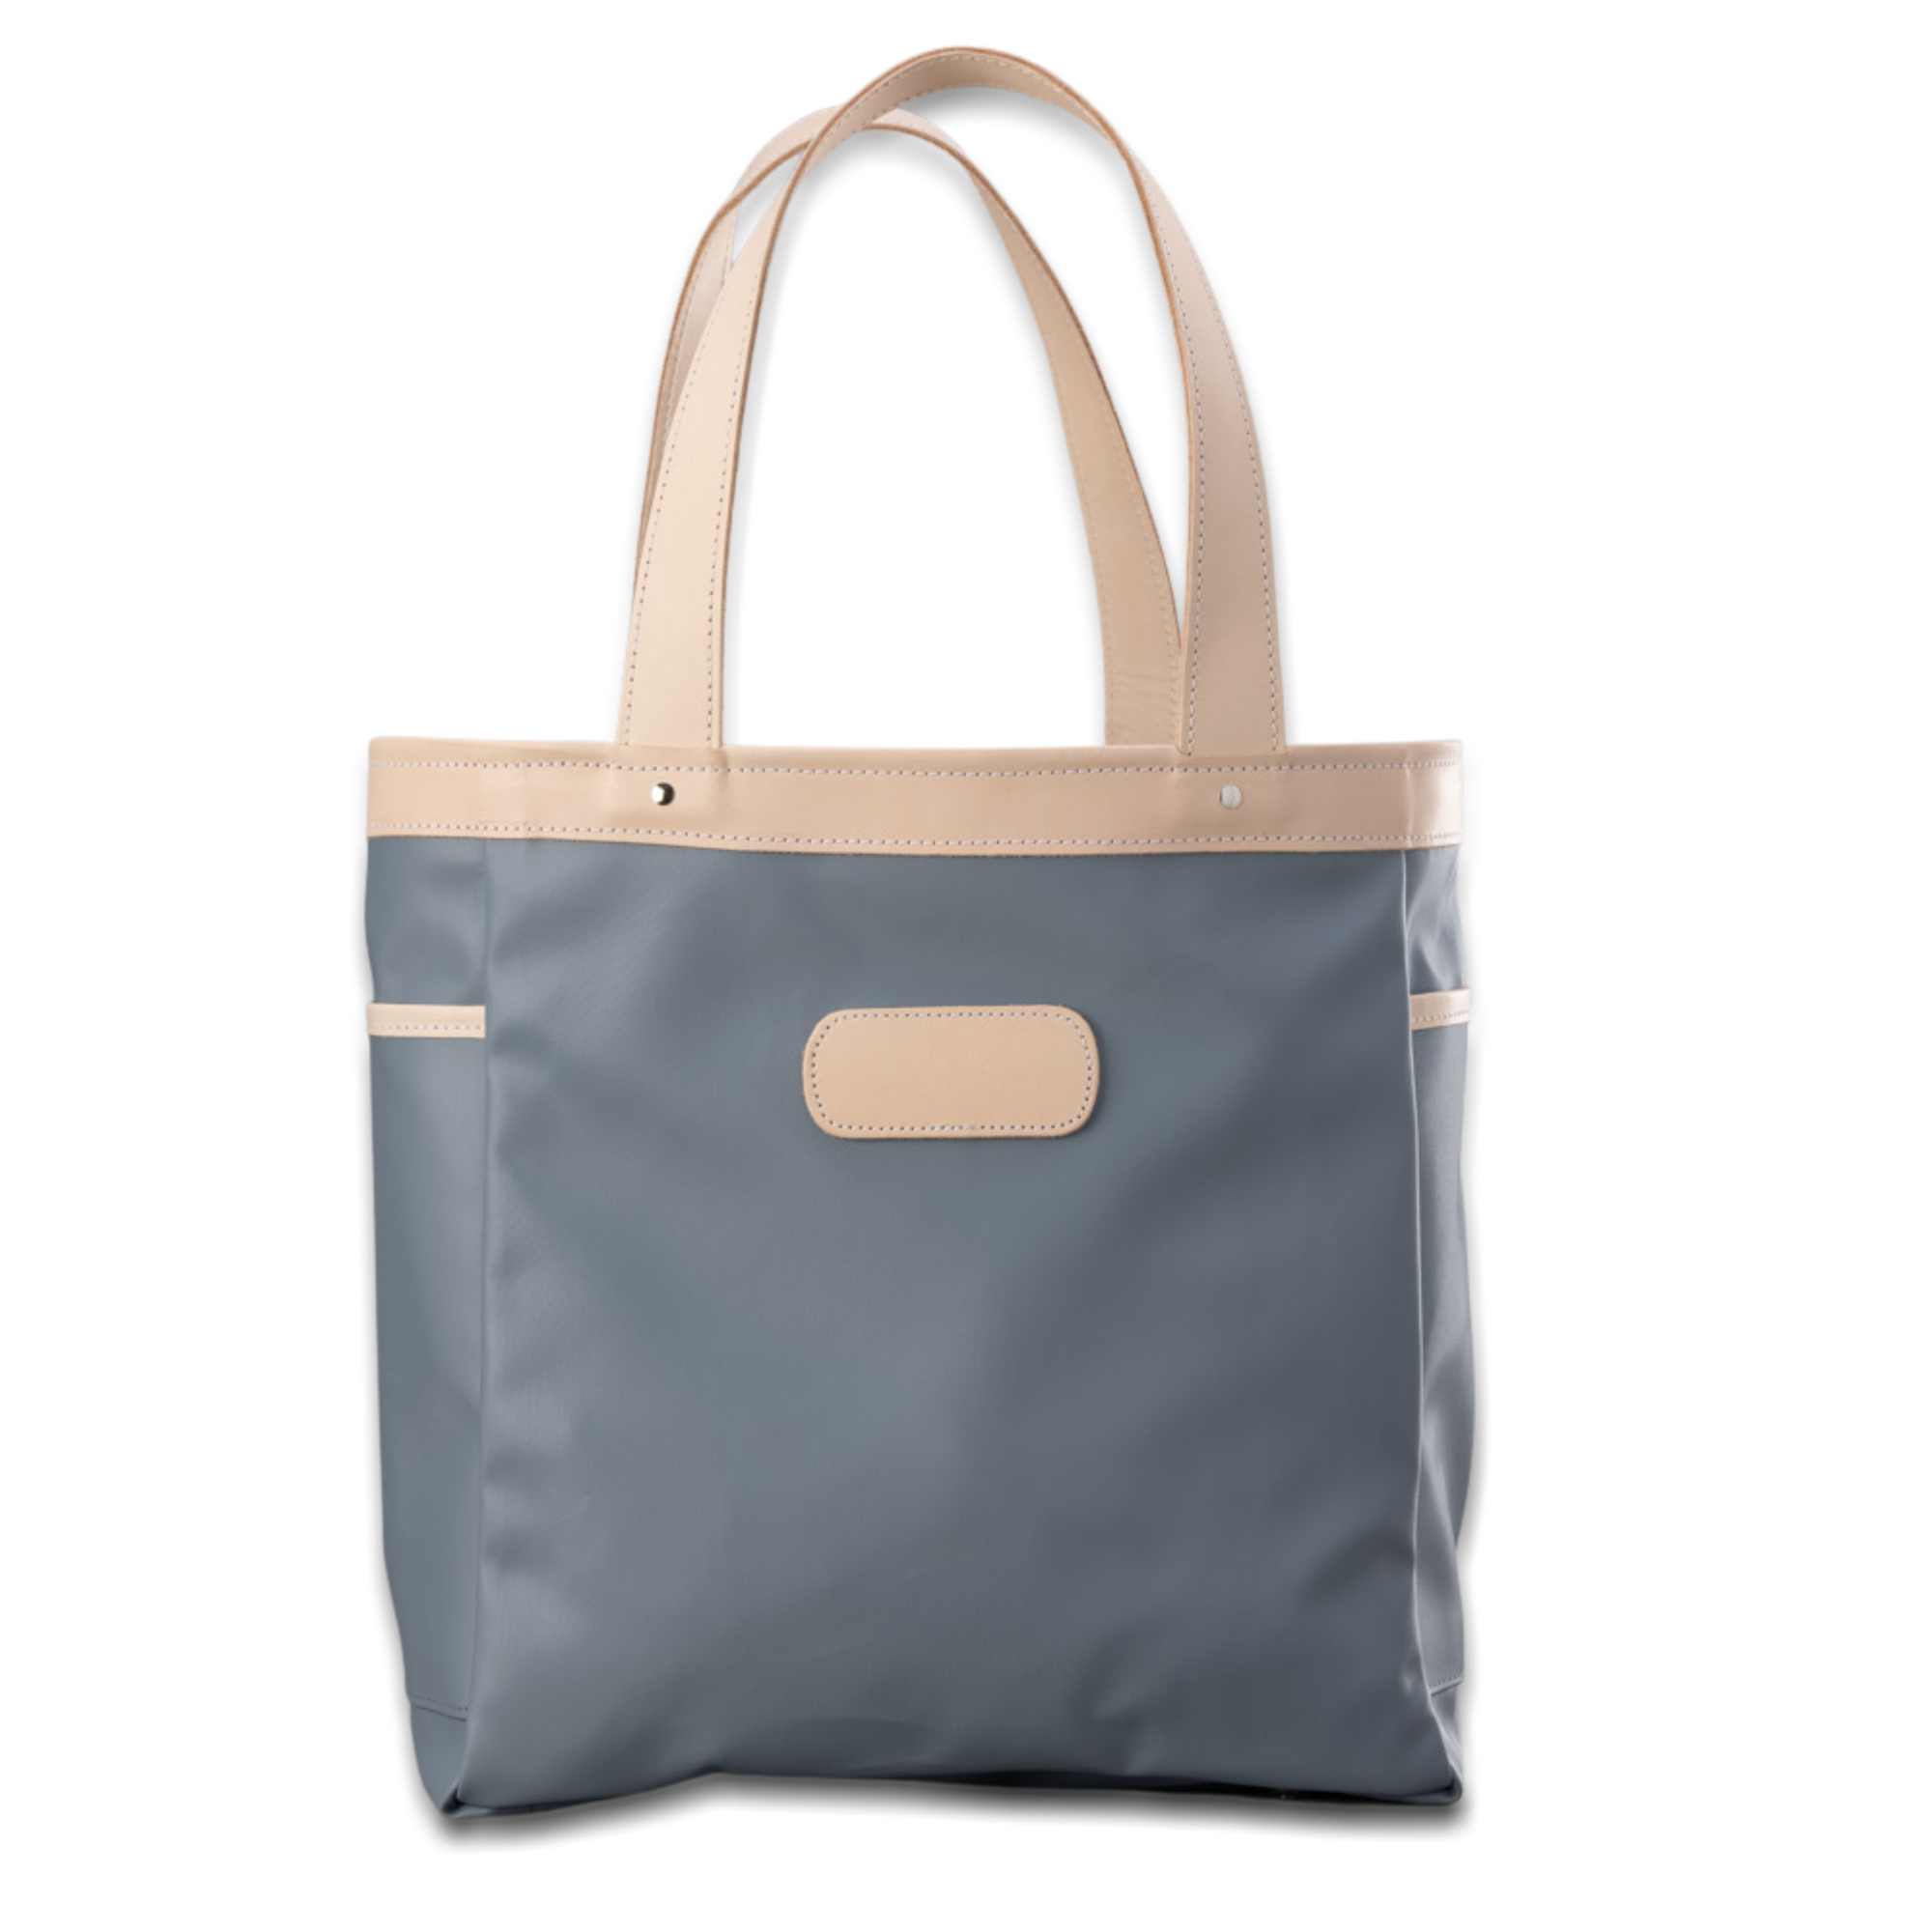 Quality made in America  durable coated canvas and natural leather tote bag with leather patch to personalize with initials or monogram